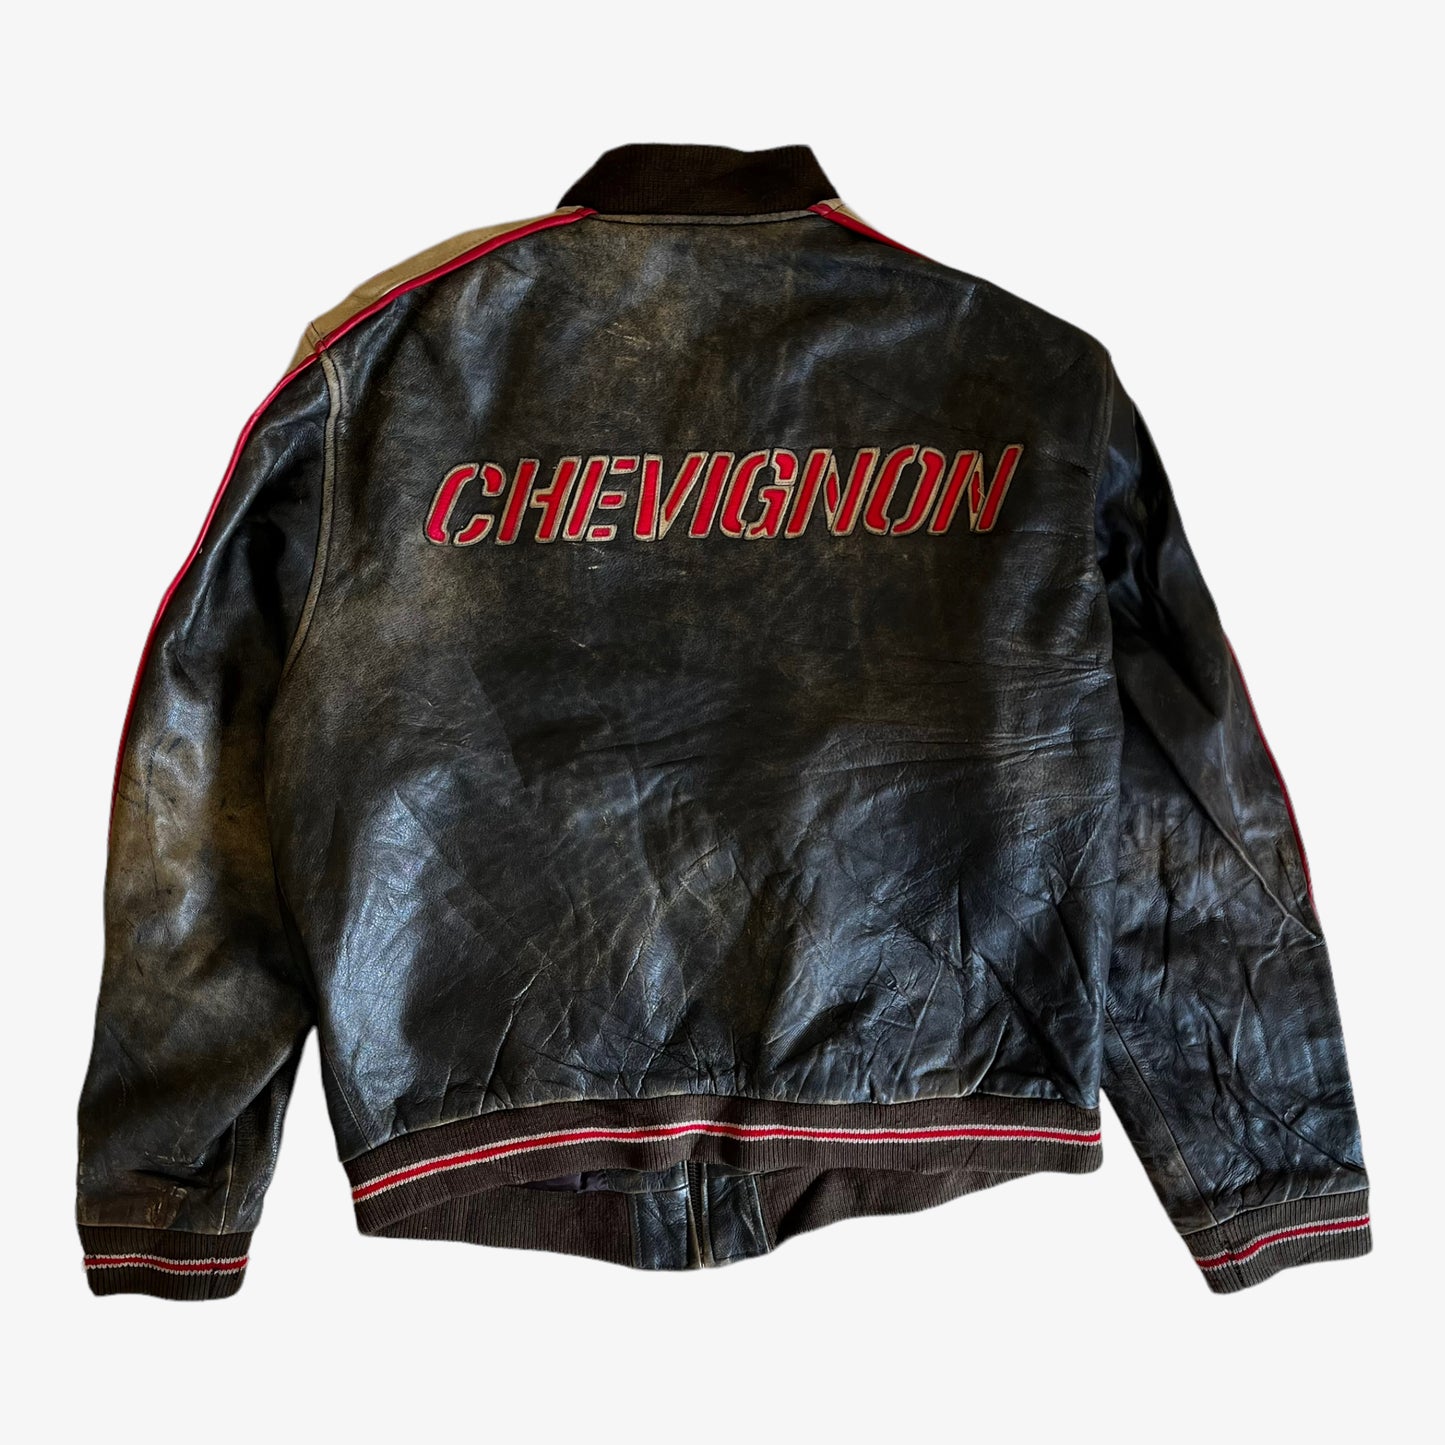 Vintage 90s Chevignon Leather Jacket With Back Spell Out Back - Casspios Dream